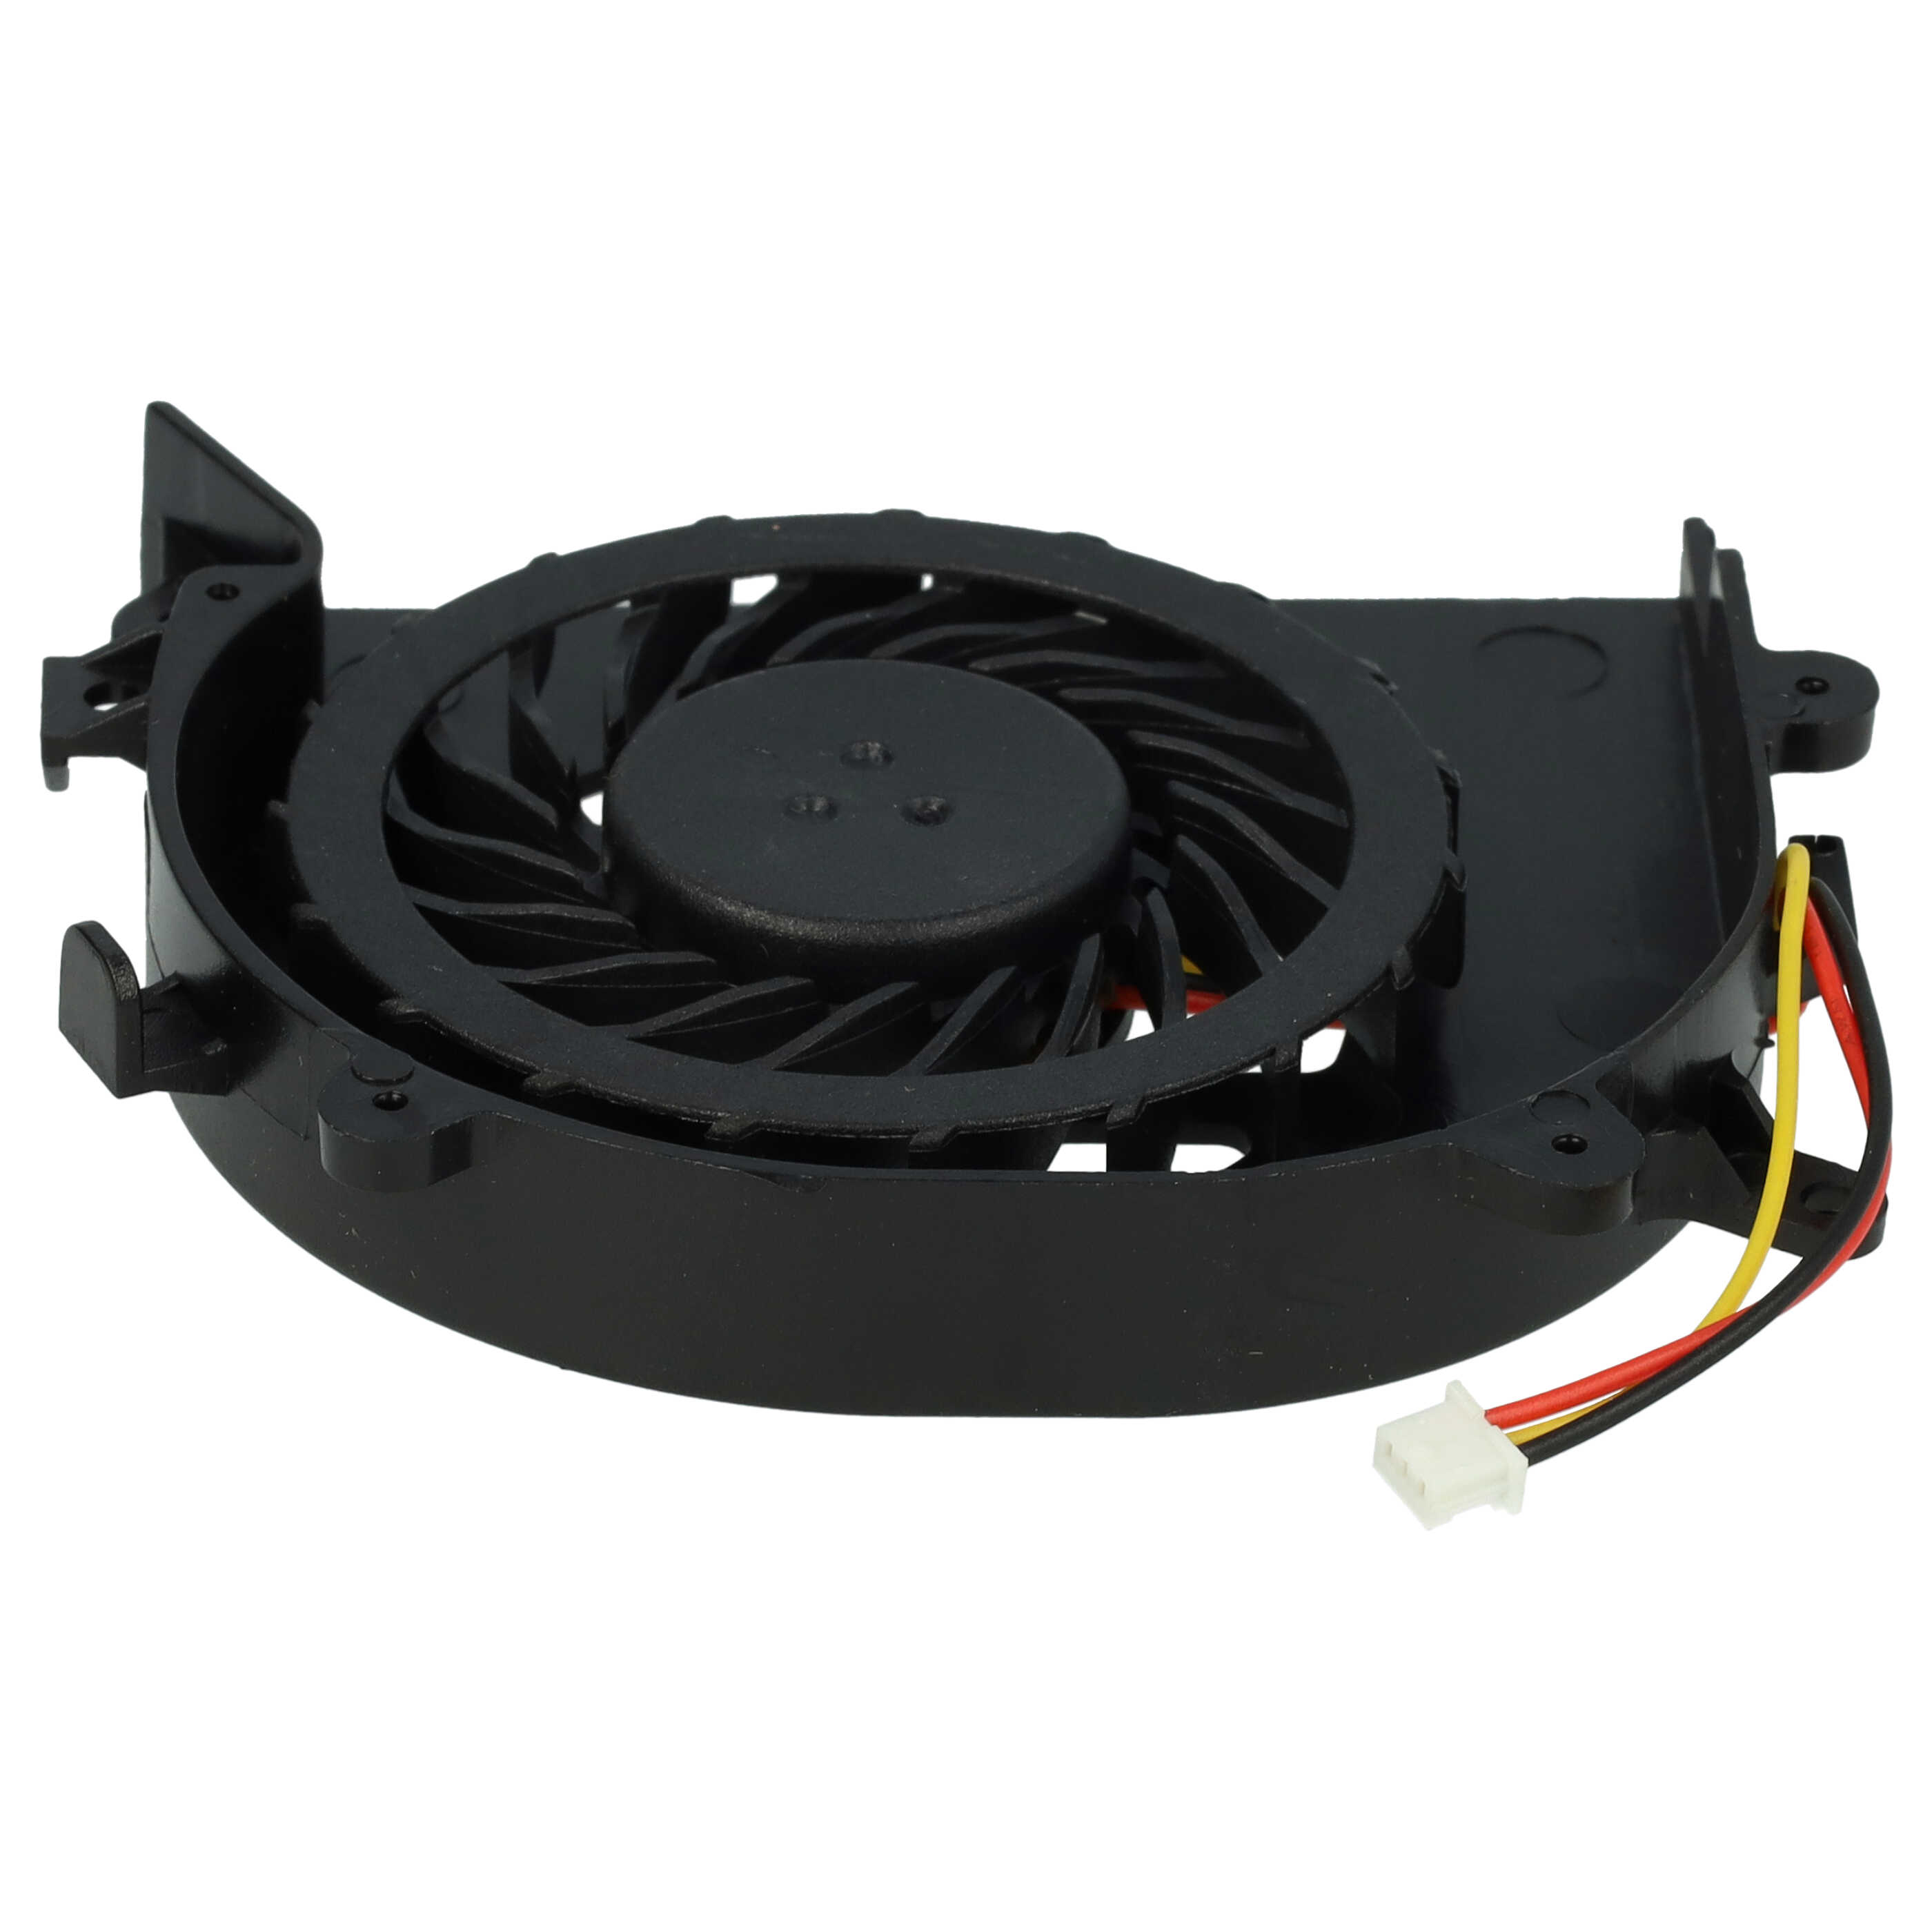 CPU / GPU Fan suitable for Sony Vaio PCG-61511L Notebook 81 x 65 x 12 mm